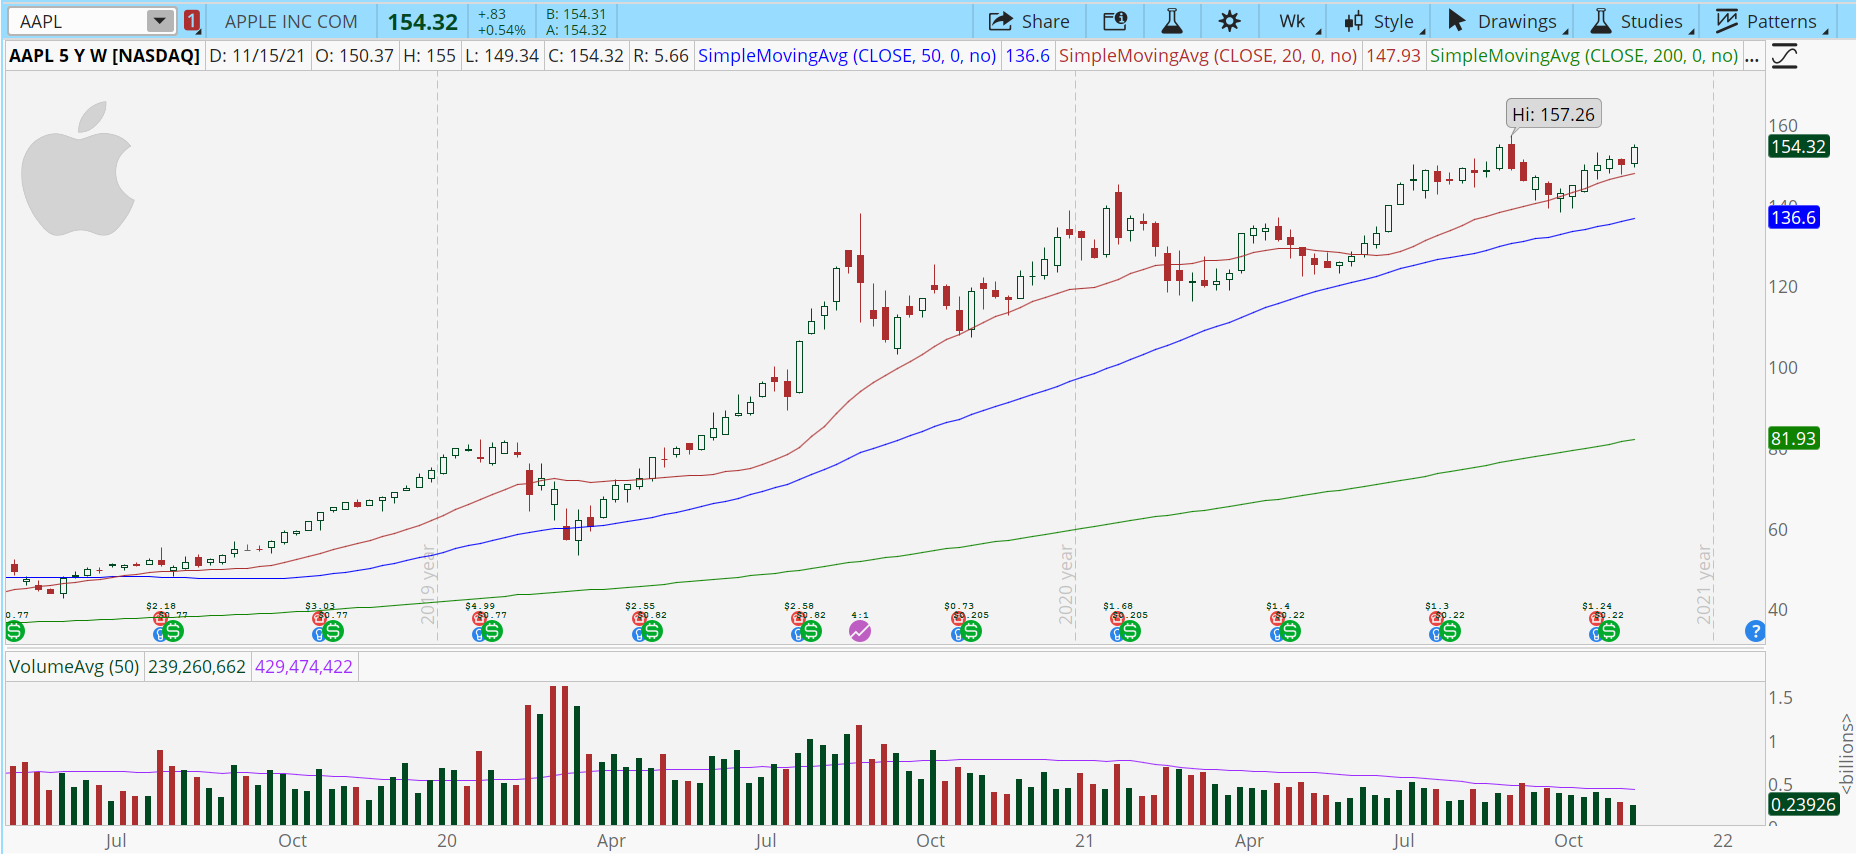 Apple (AAPL) weekly stock chart with uptrend.